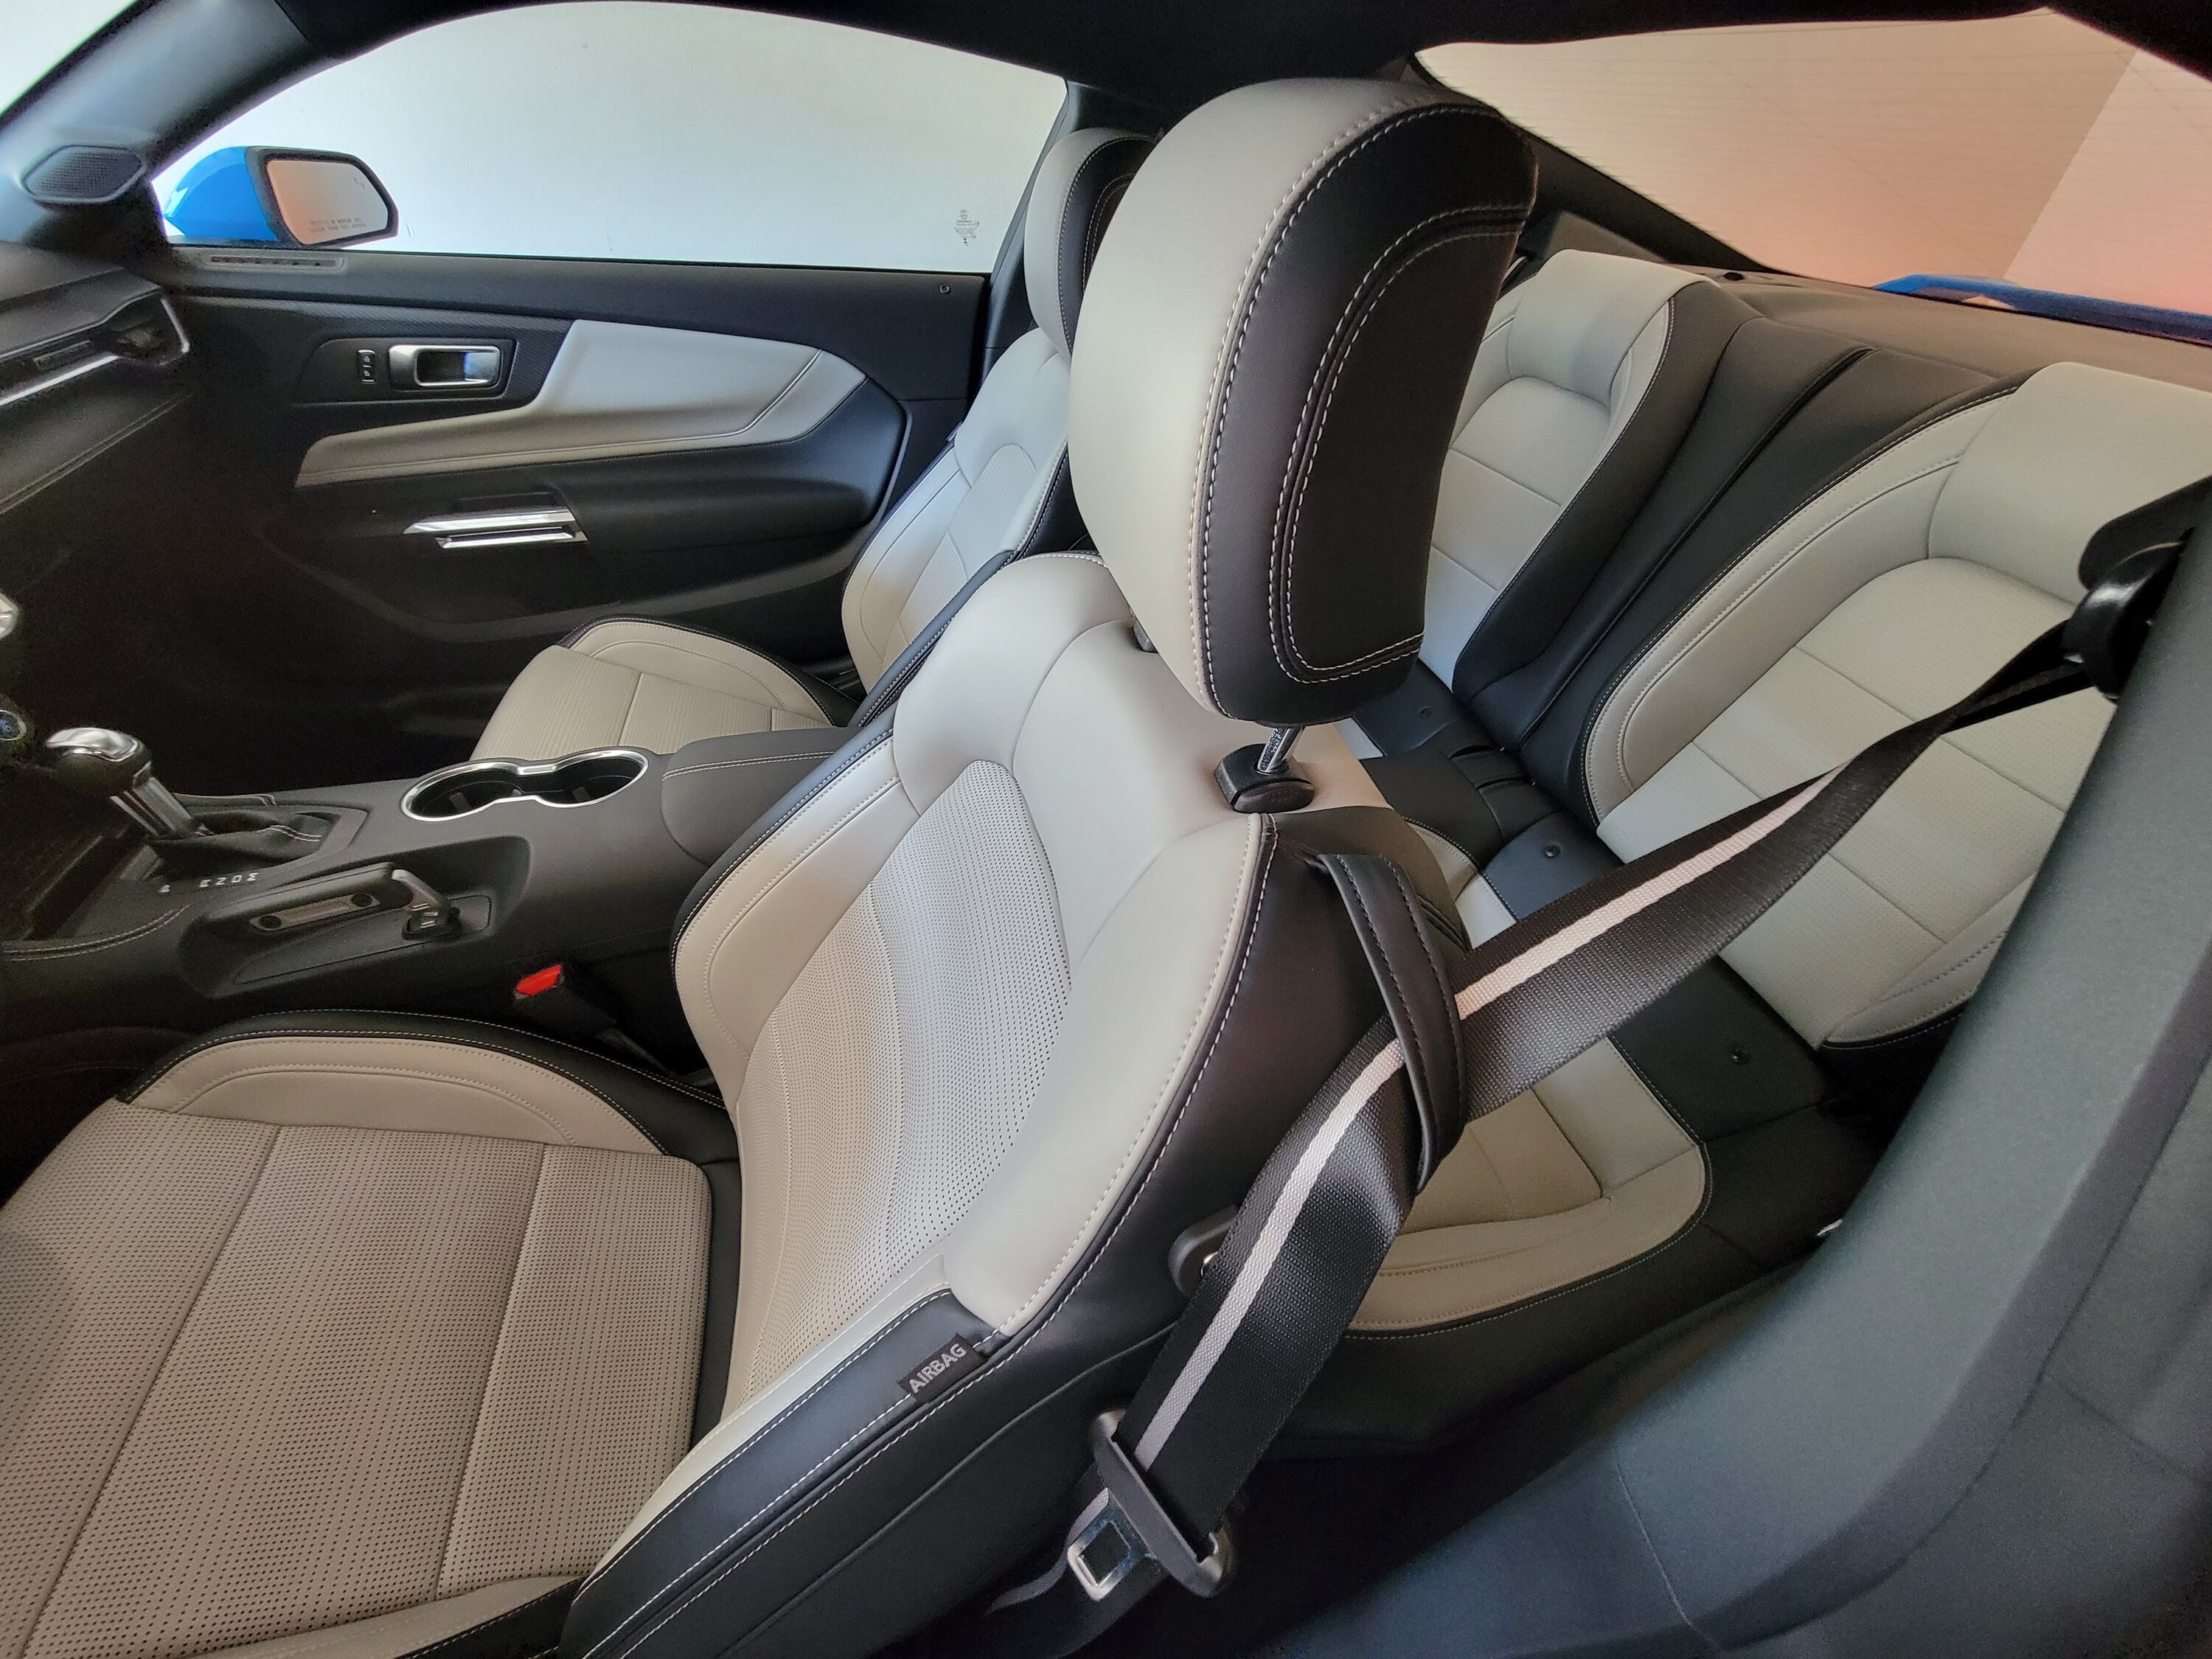 S650 Mustang Let’s post interior photos here! 20230927_174551